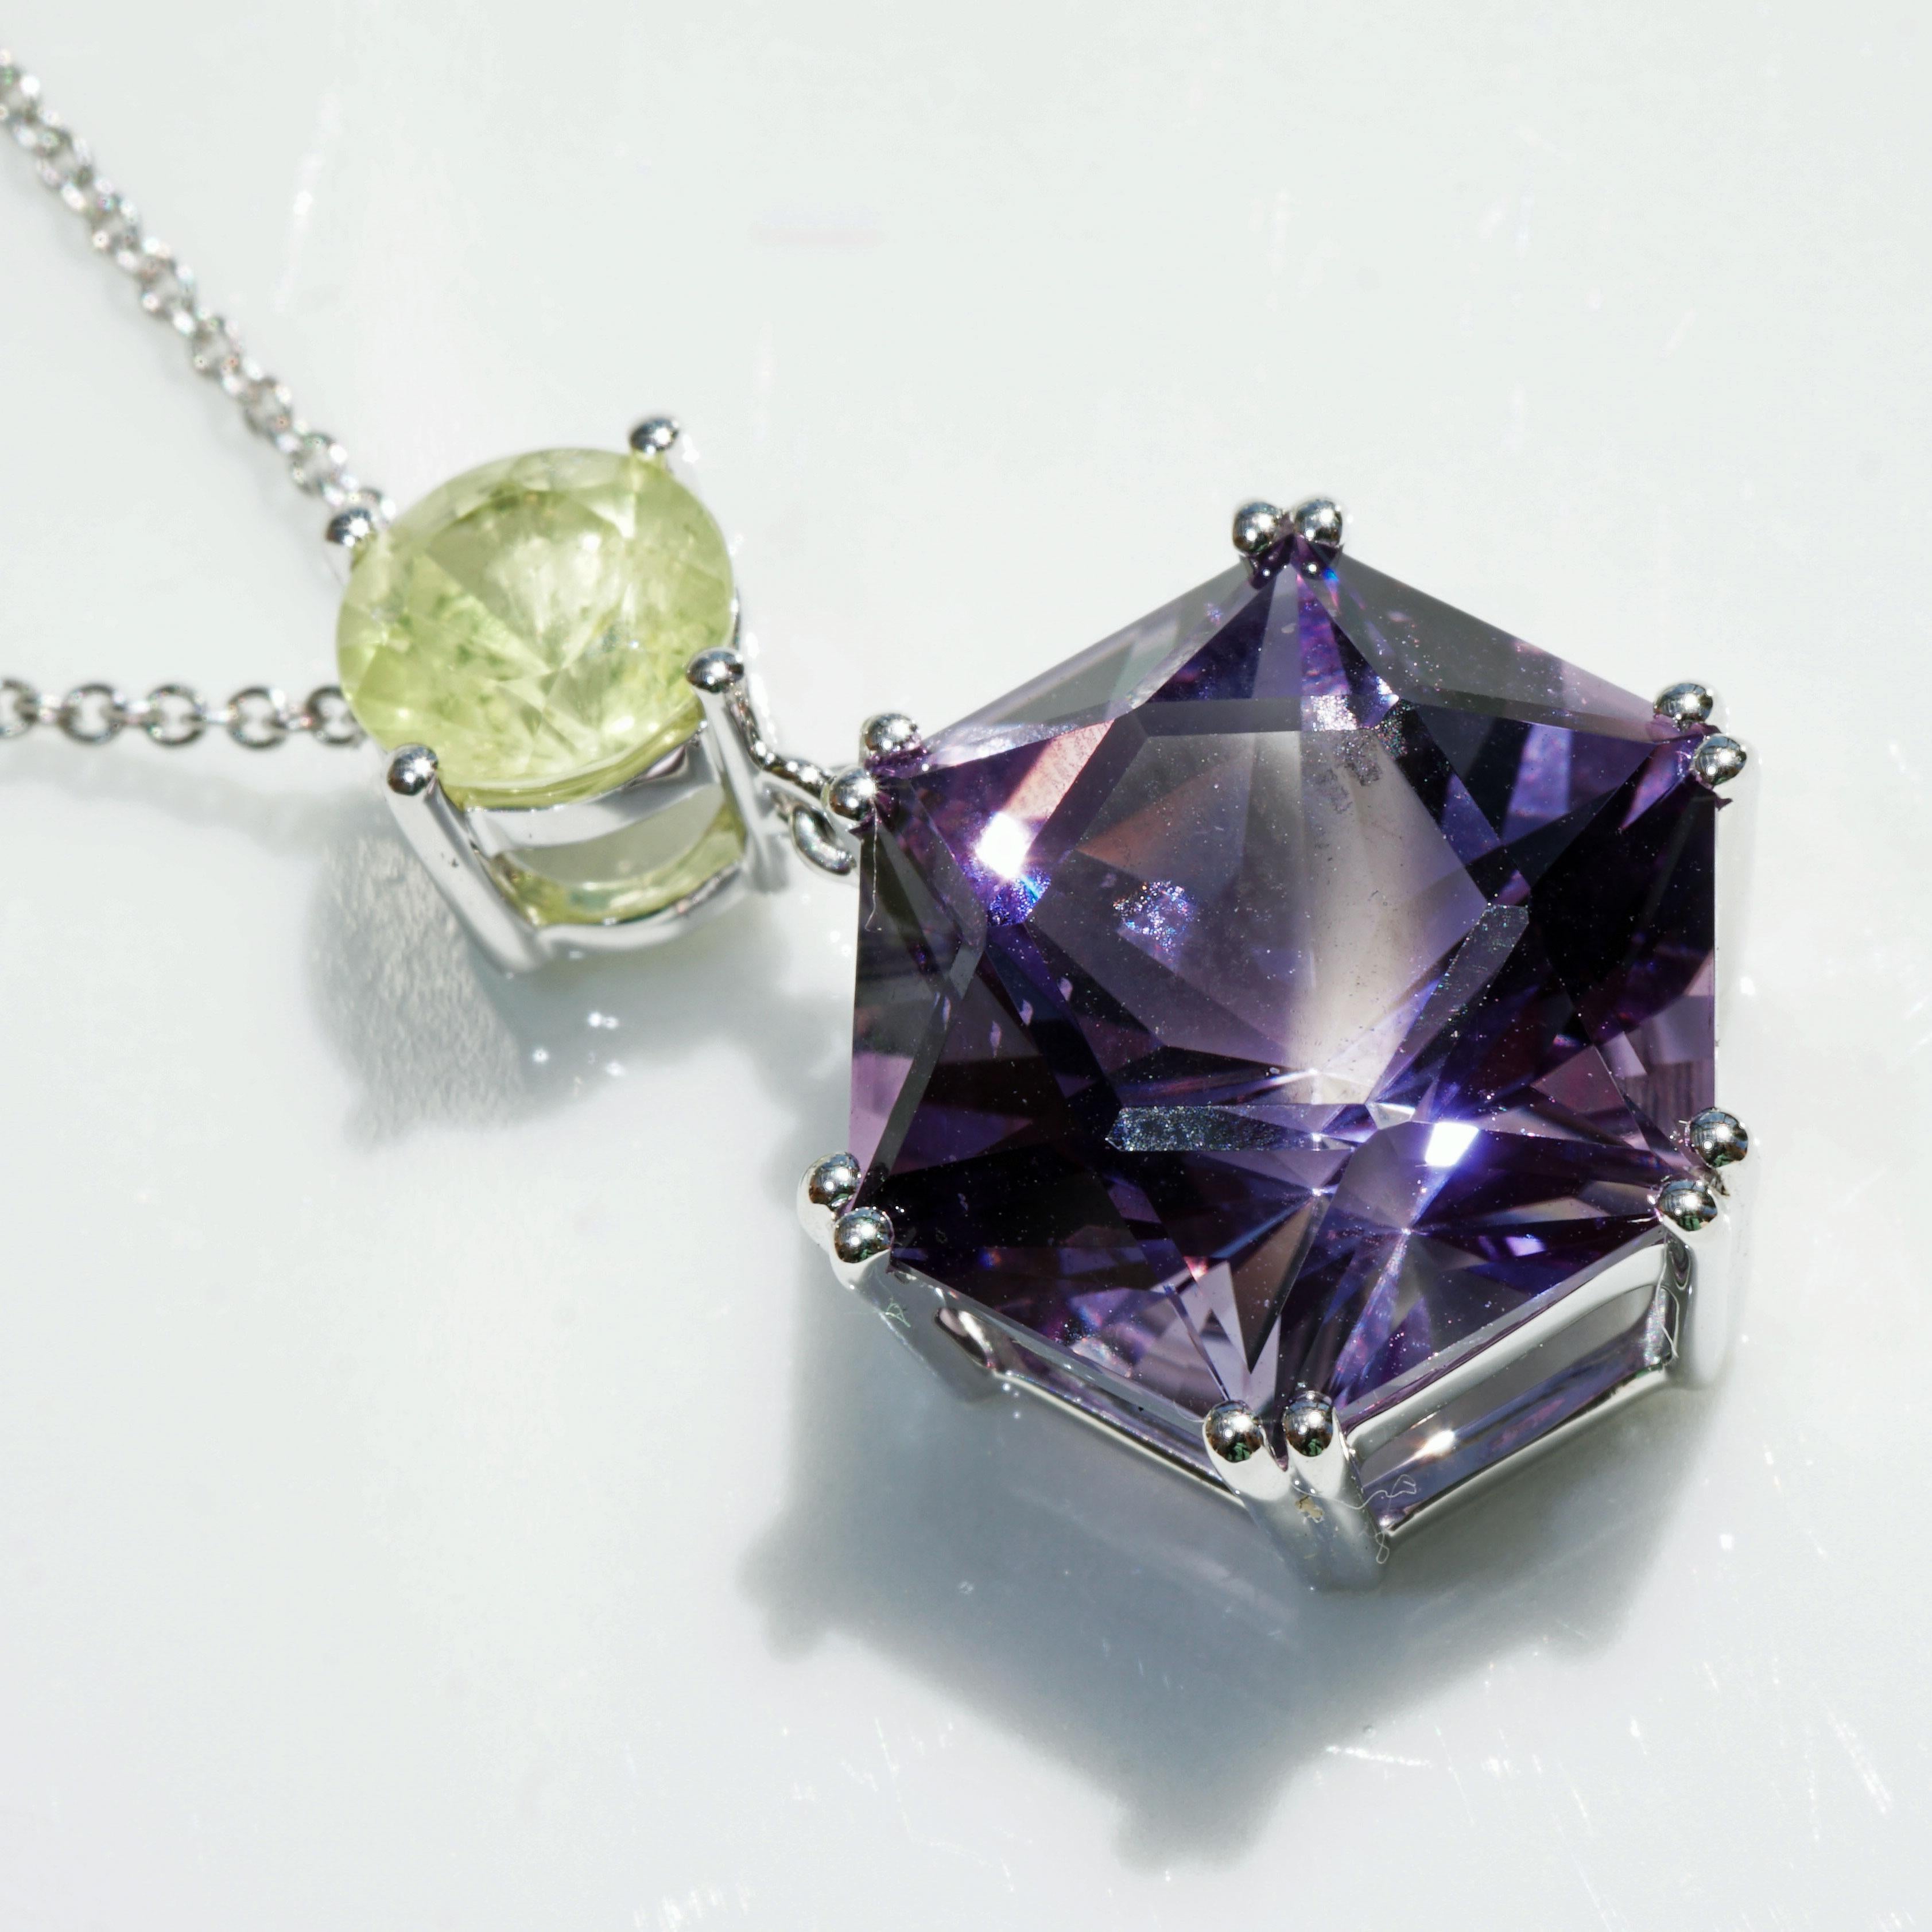 Hexagon Cut Chrysoberyll Amethyst Pendant with Chain neverseen Colors 10 ct Star Cut Brazil For Sale